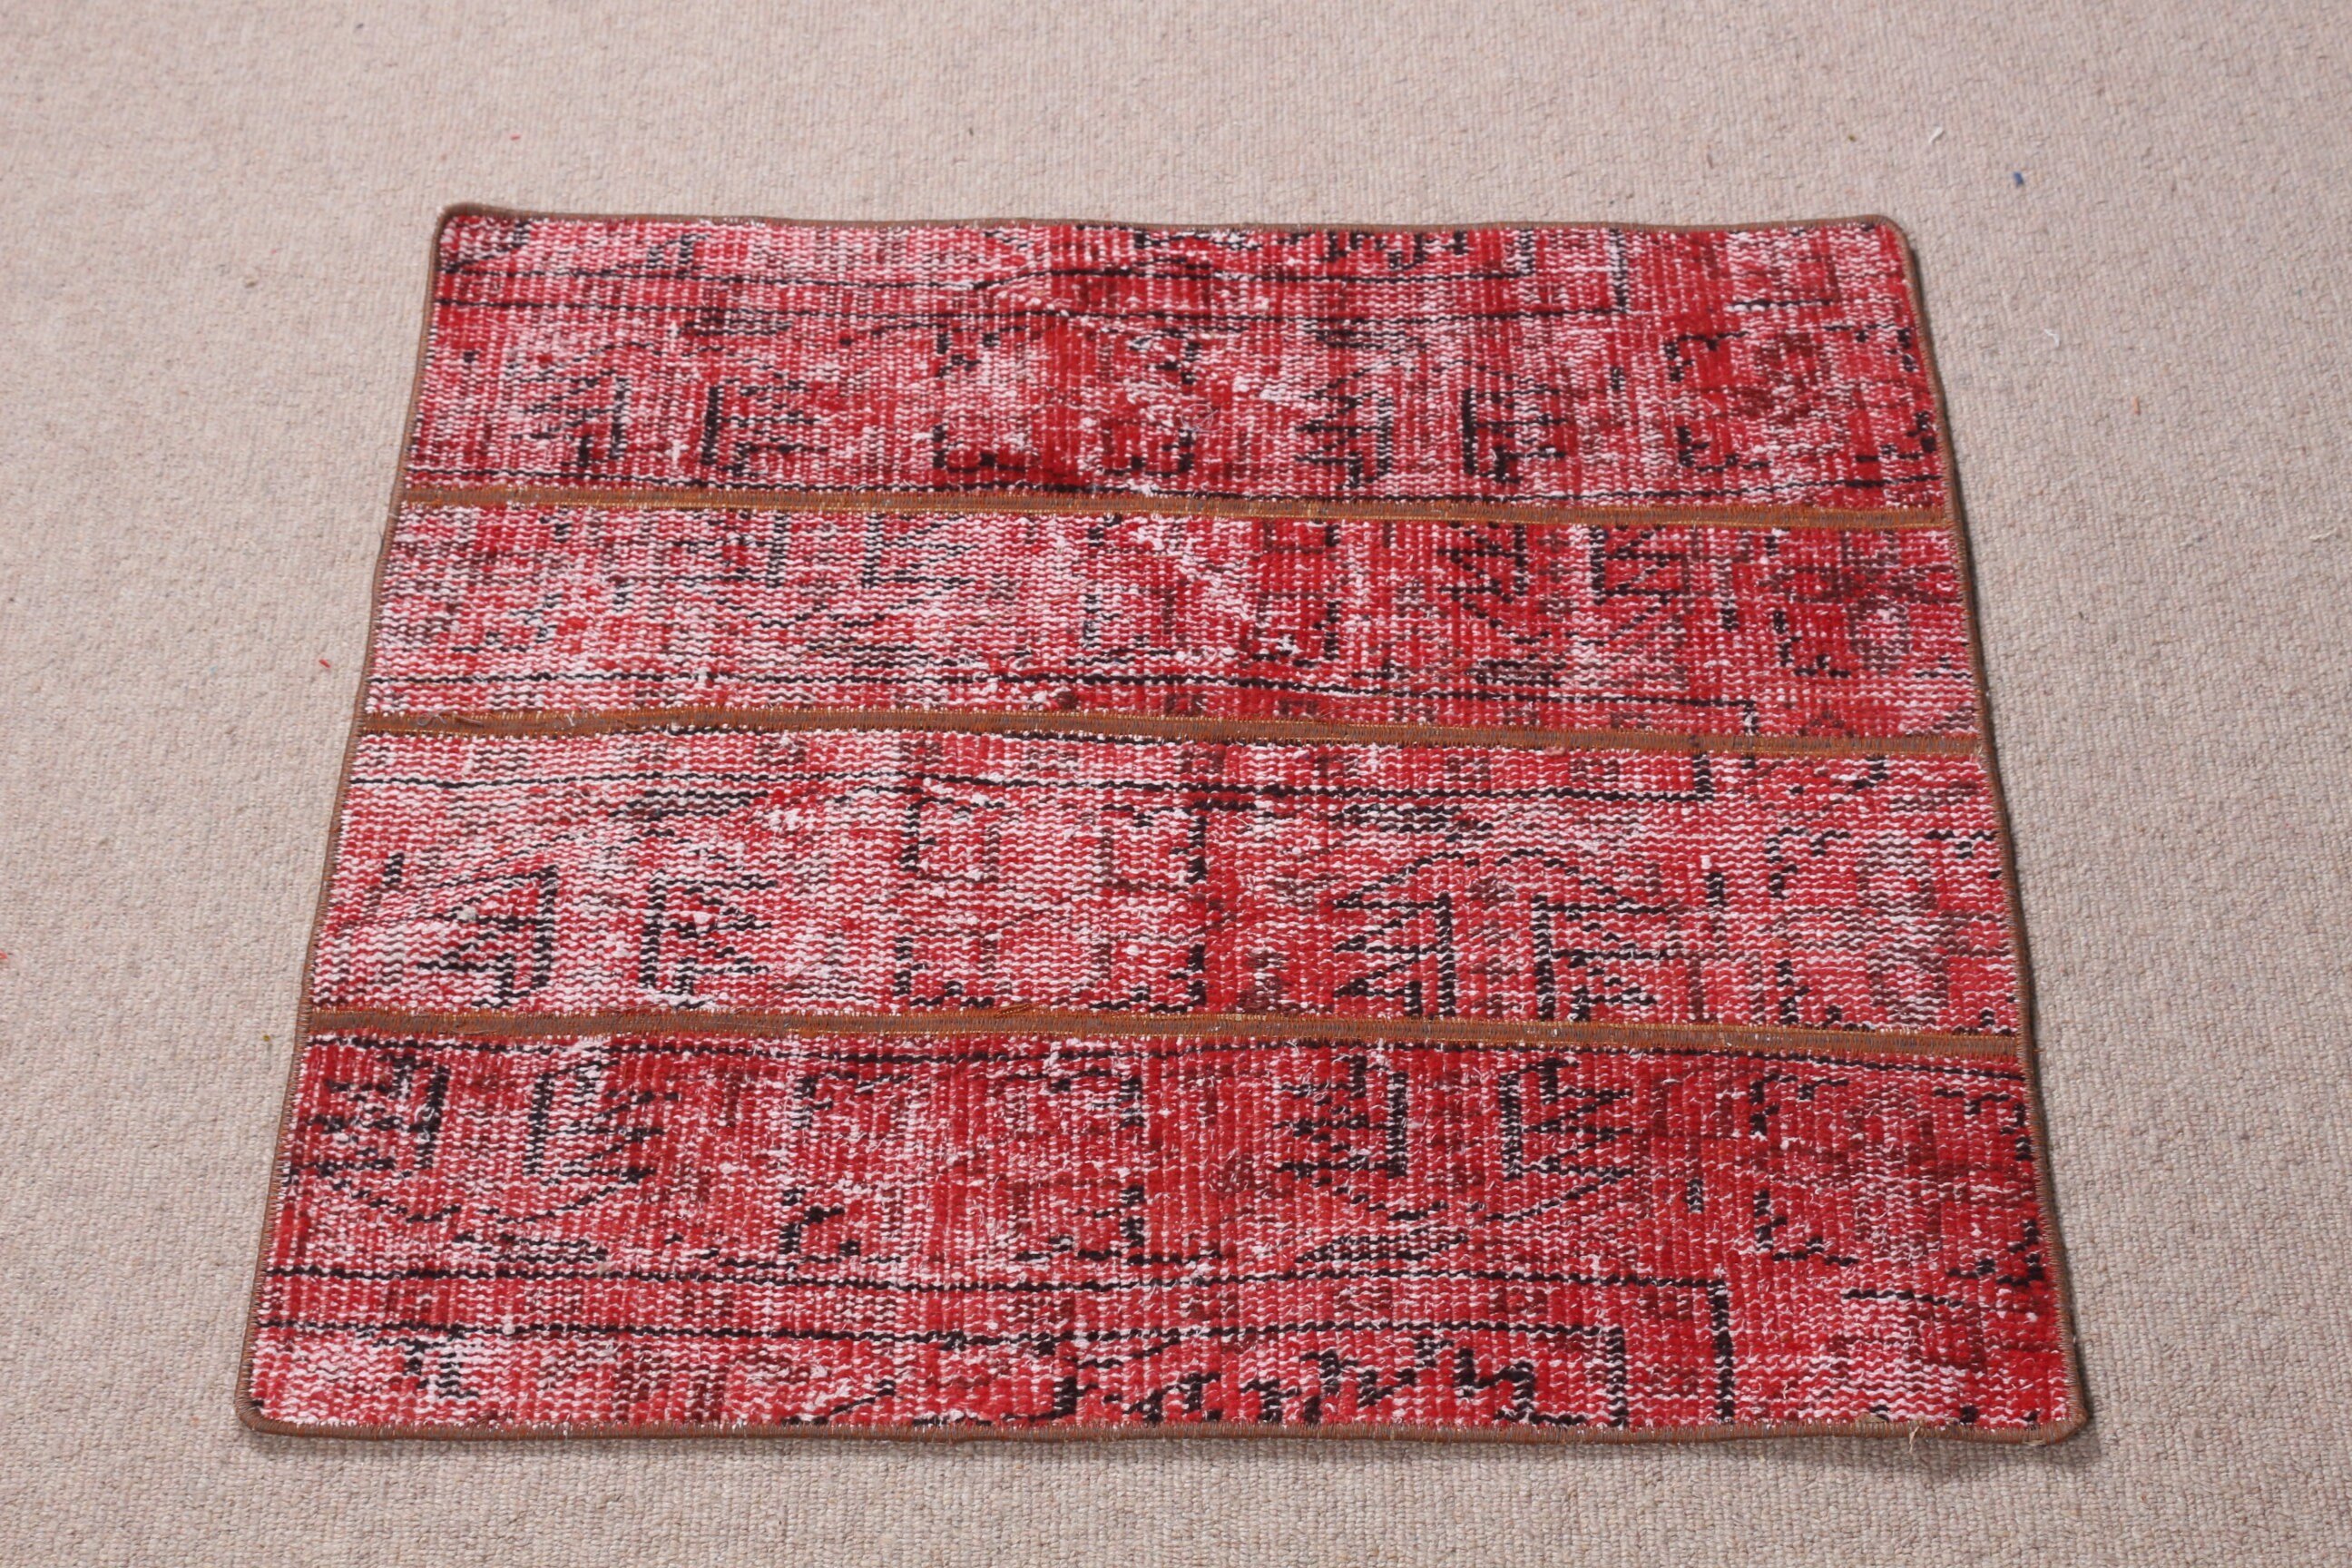 Vintage Rug, Rugs for Entry, Home Decor Rugs, Turkish Rug, Tribal Rug, Bedroom Rug, Red Home Decor Rugs, 2.6x2.6 ft Small Rug, Door Mat Rug